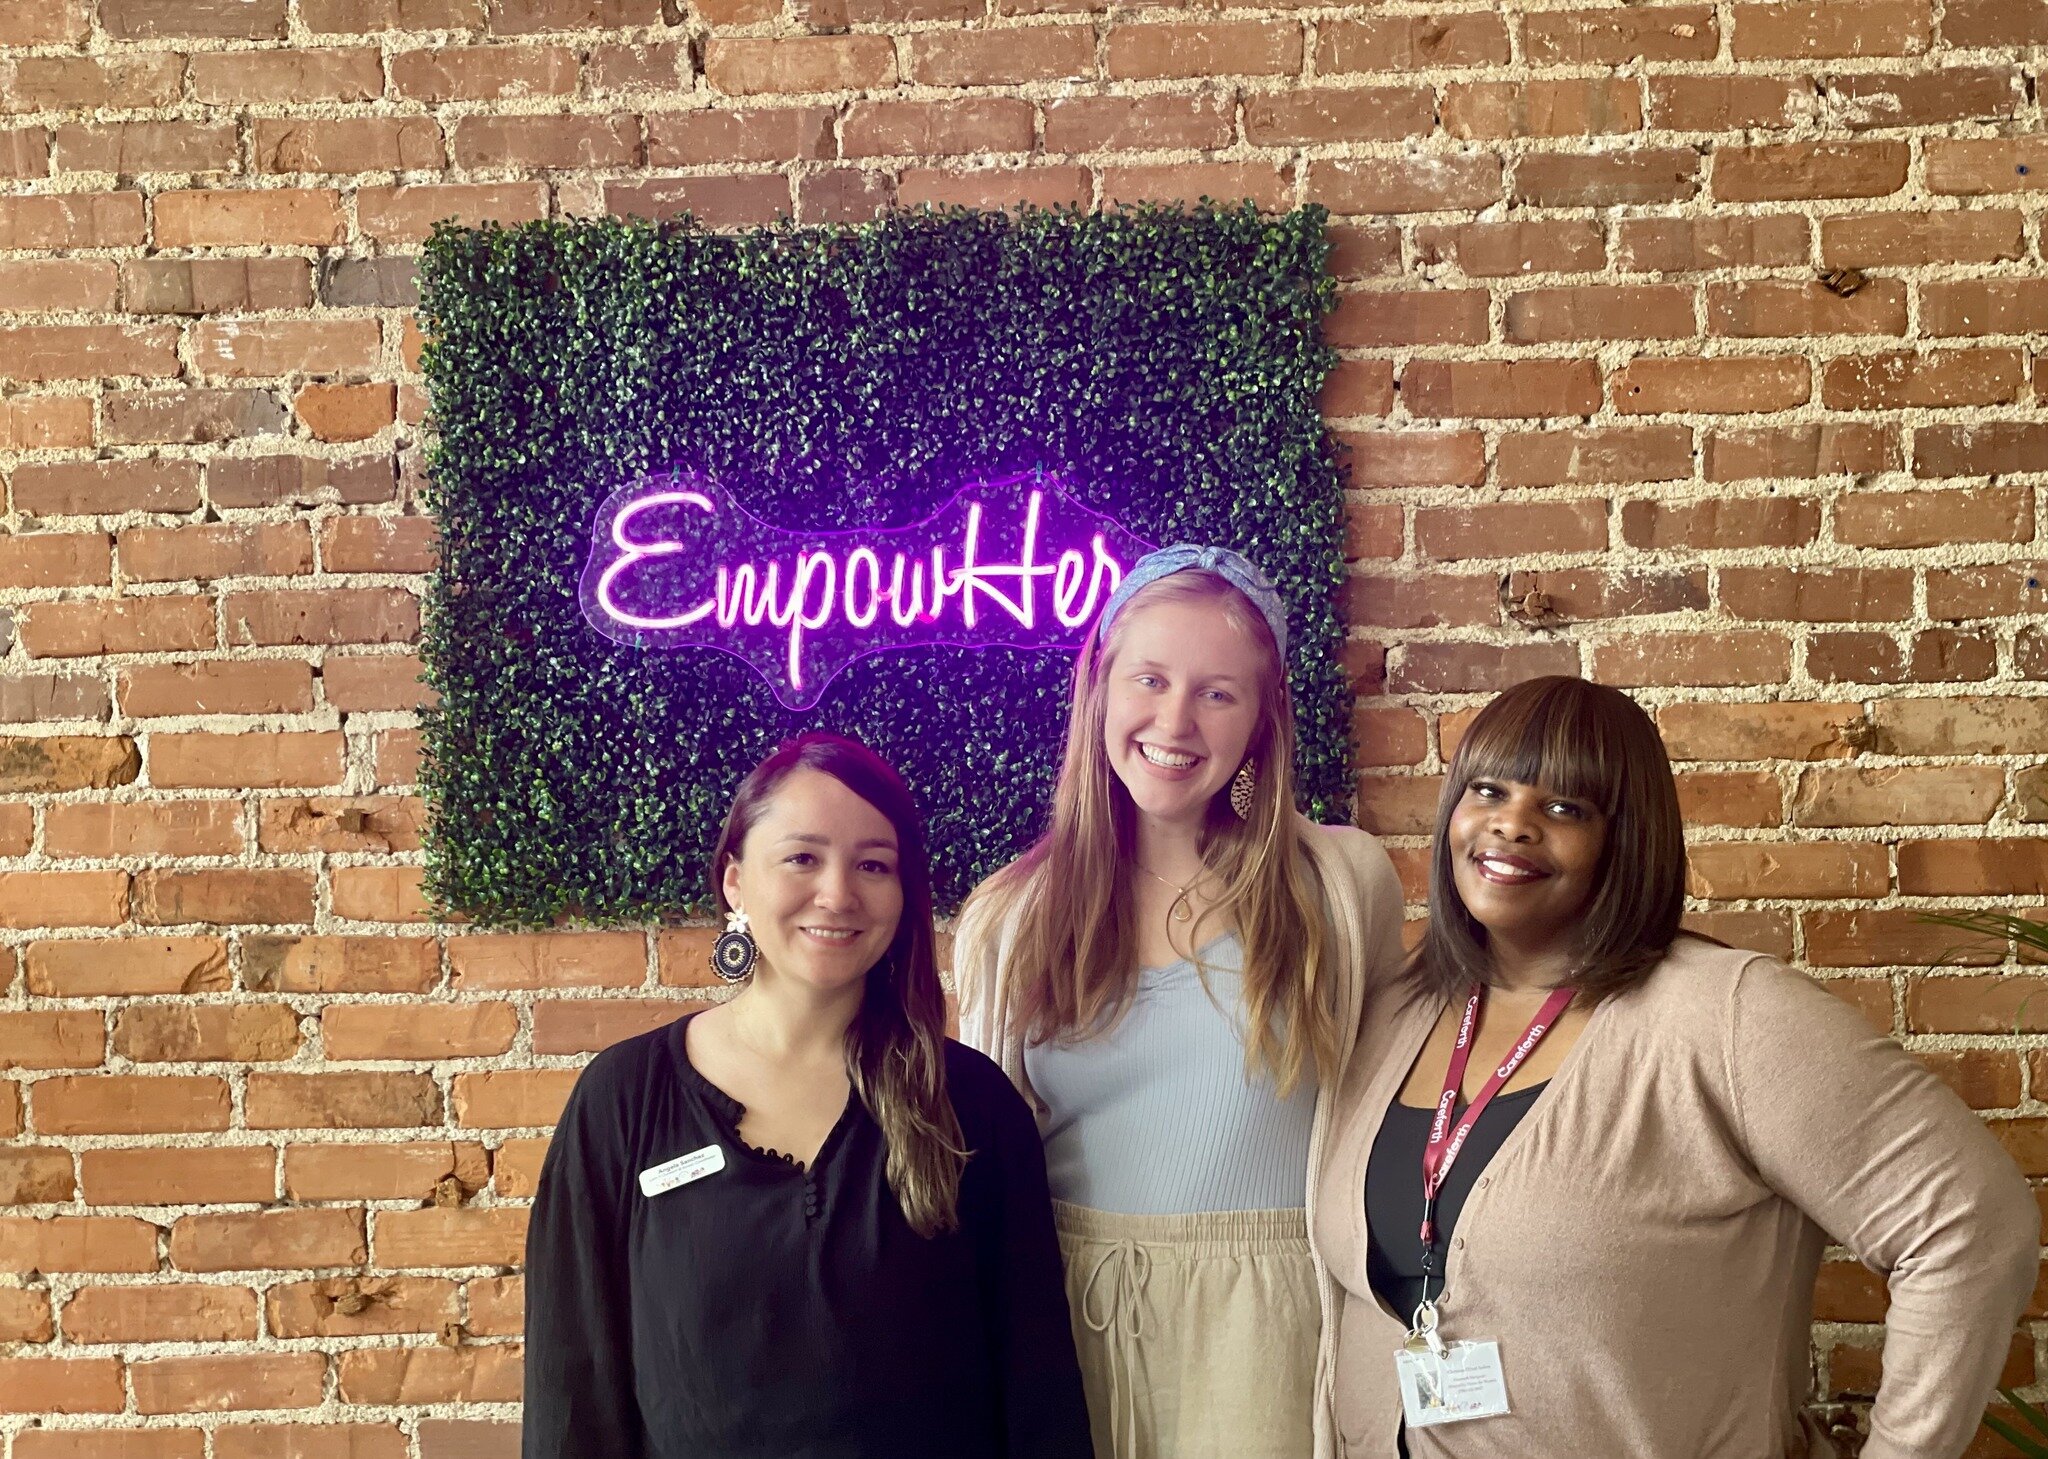 Have you met our Outreach Team?! You may see members of this trio out in Rome anywhere and everywhere, spreading the word about Hospitality House for Women! Angela, Caroline and Tina (left to right) love working with outreach clients, doing community